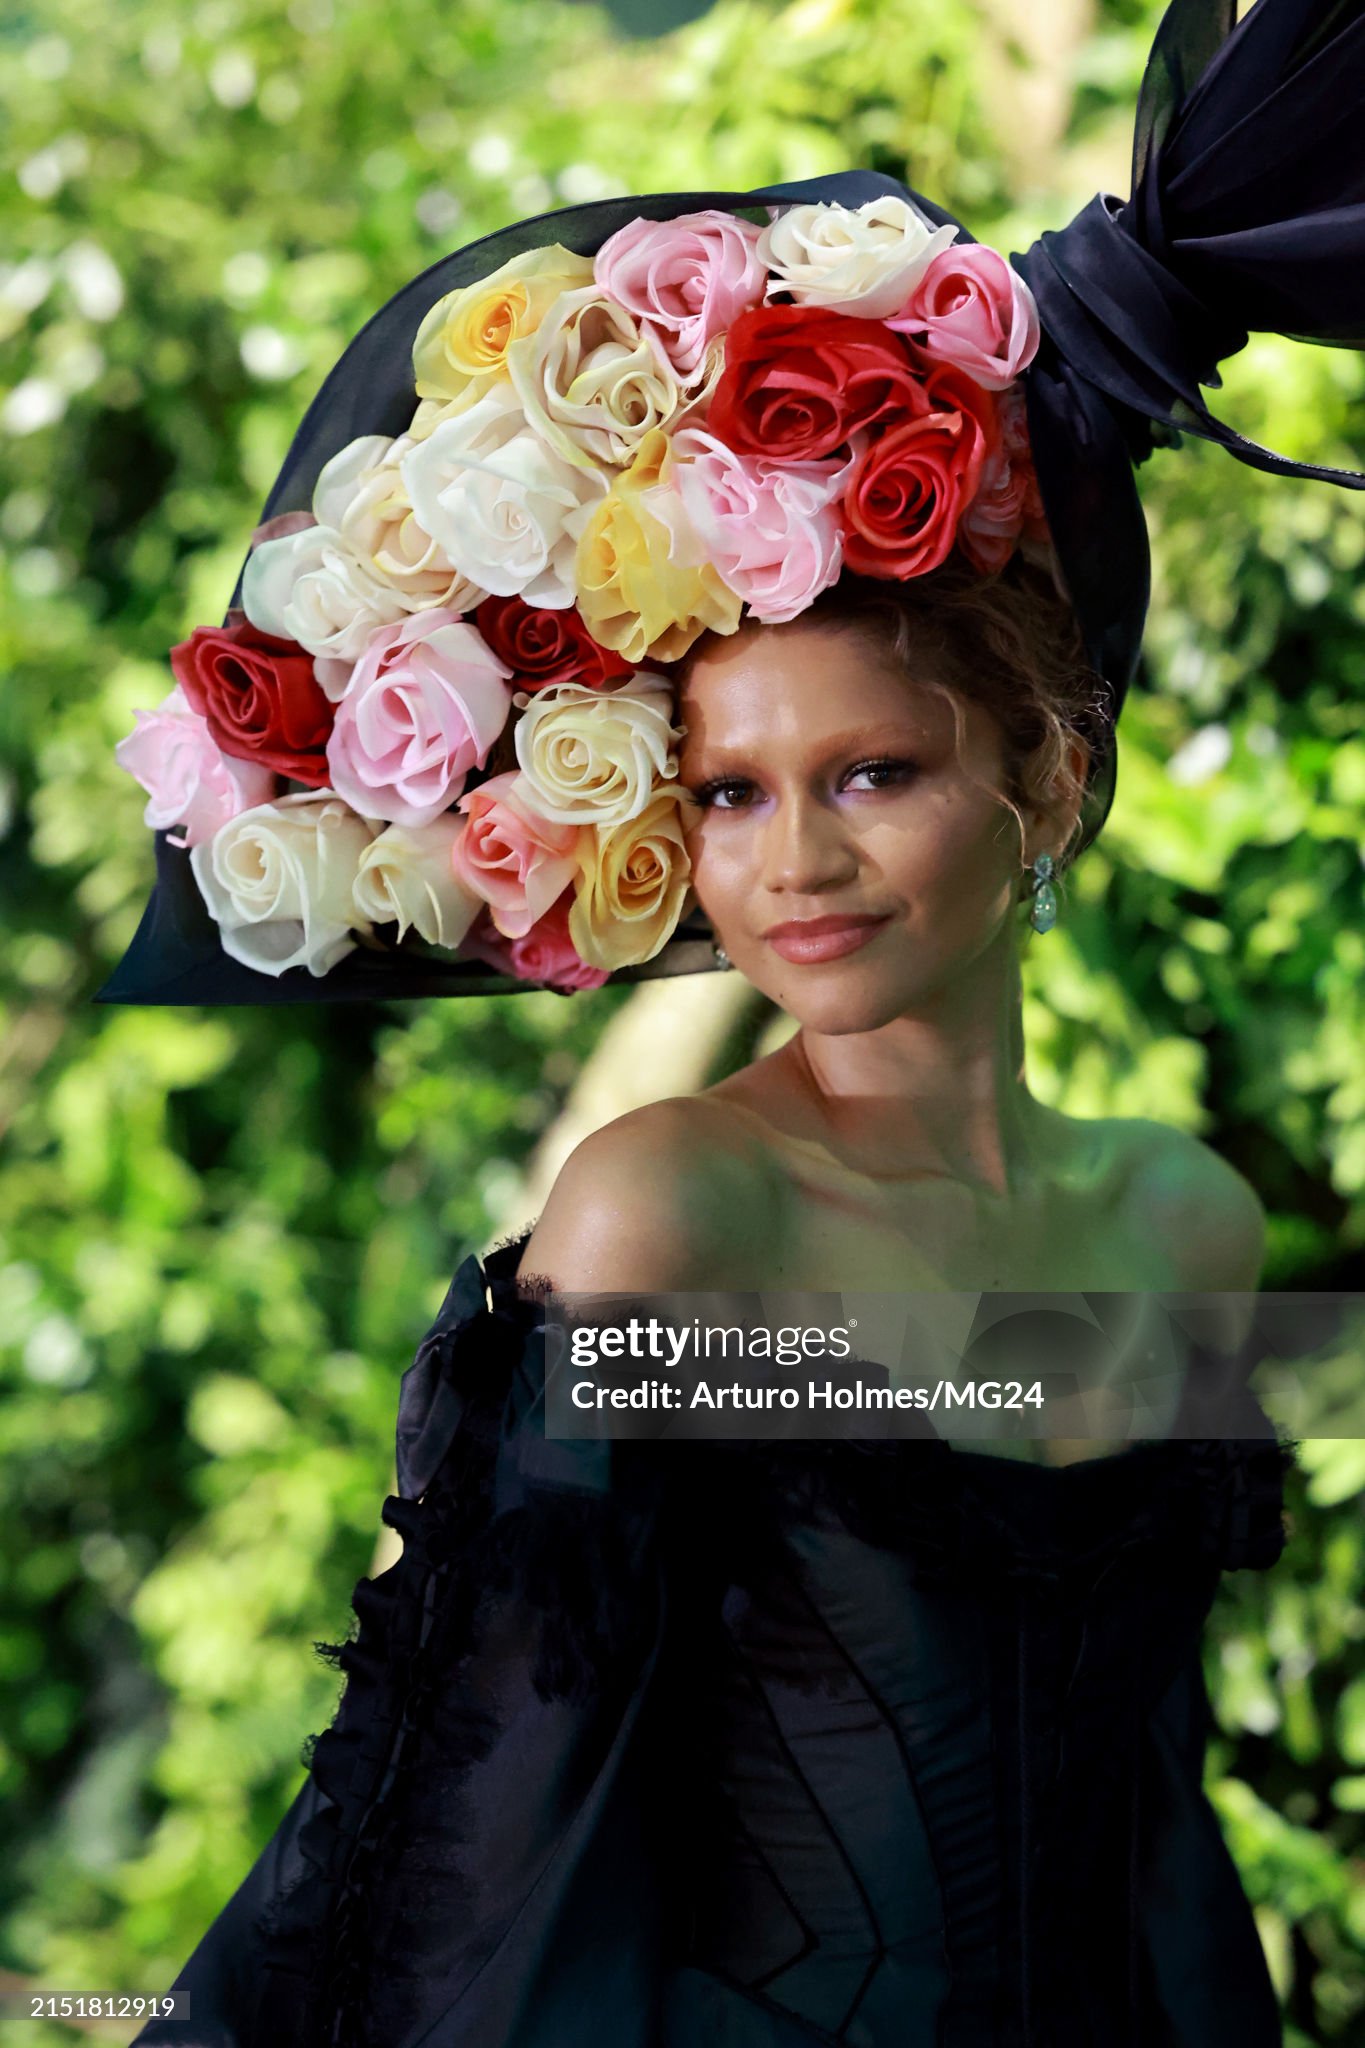 gettyimages-2151812919-2048x2048.jpg